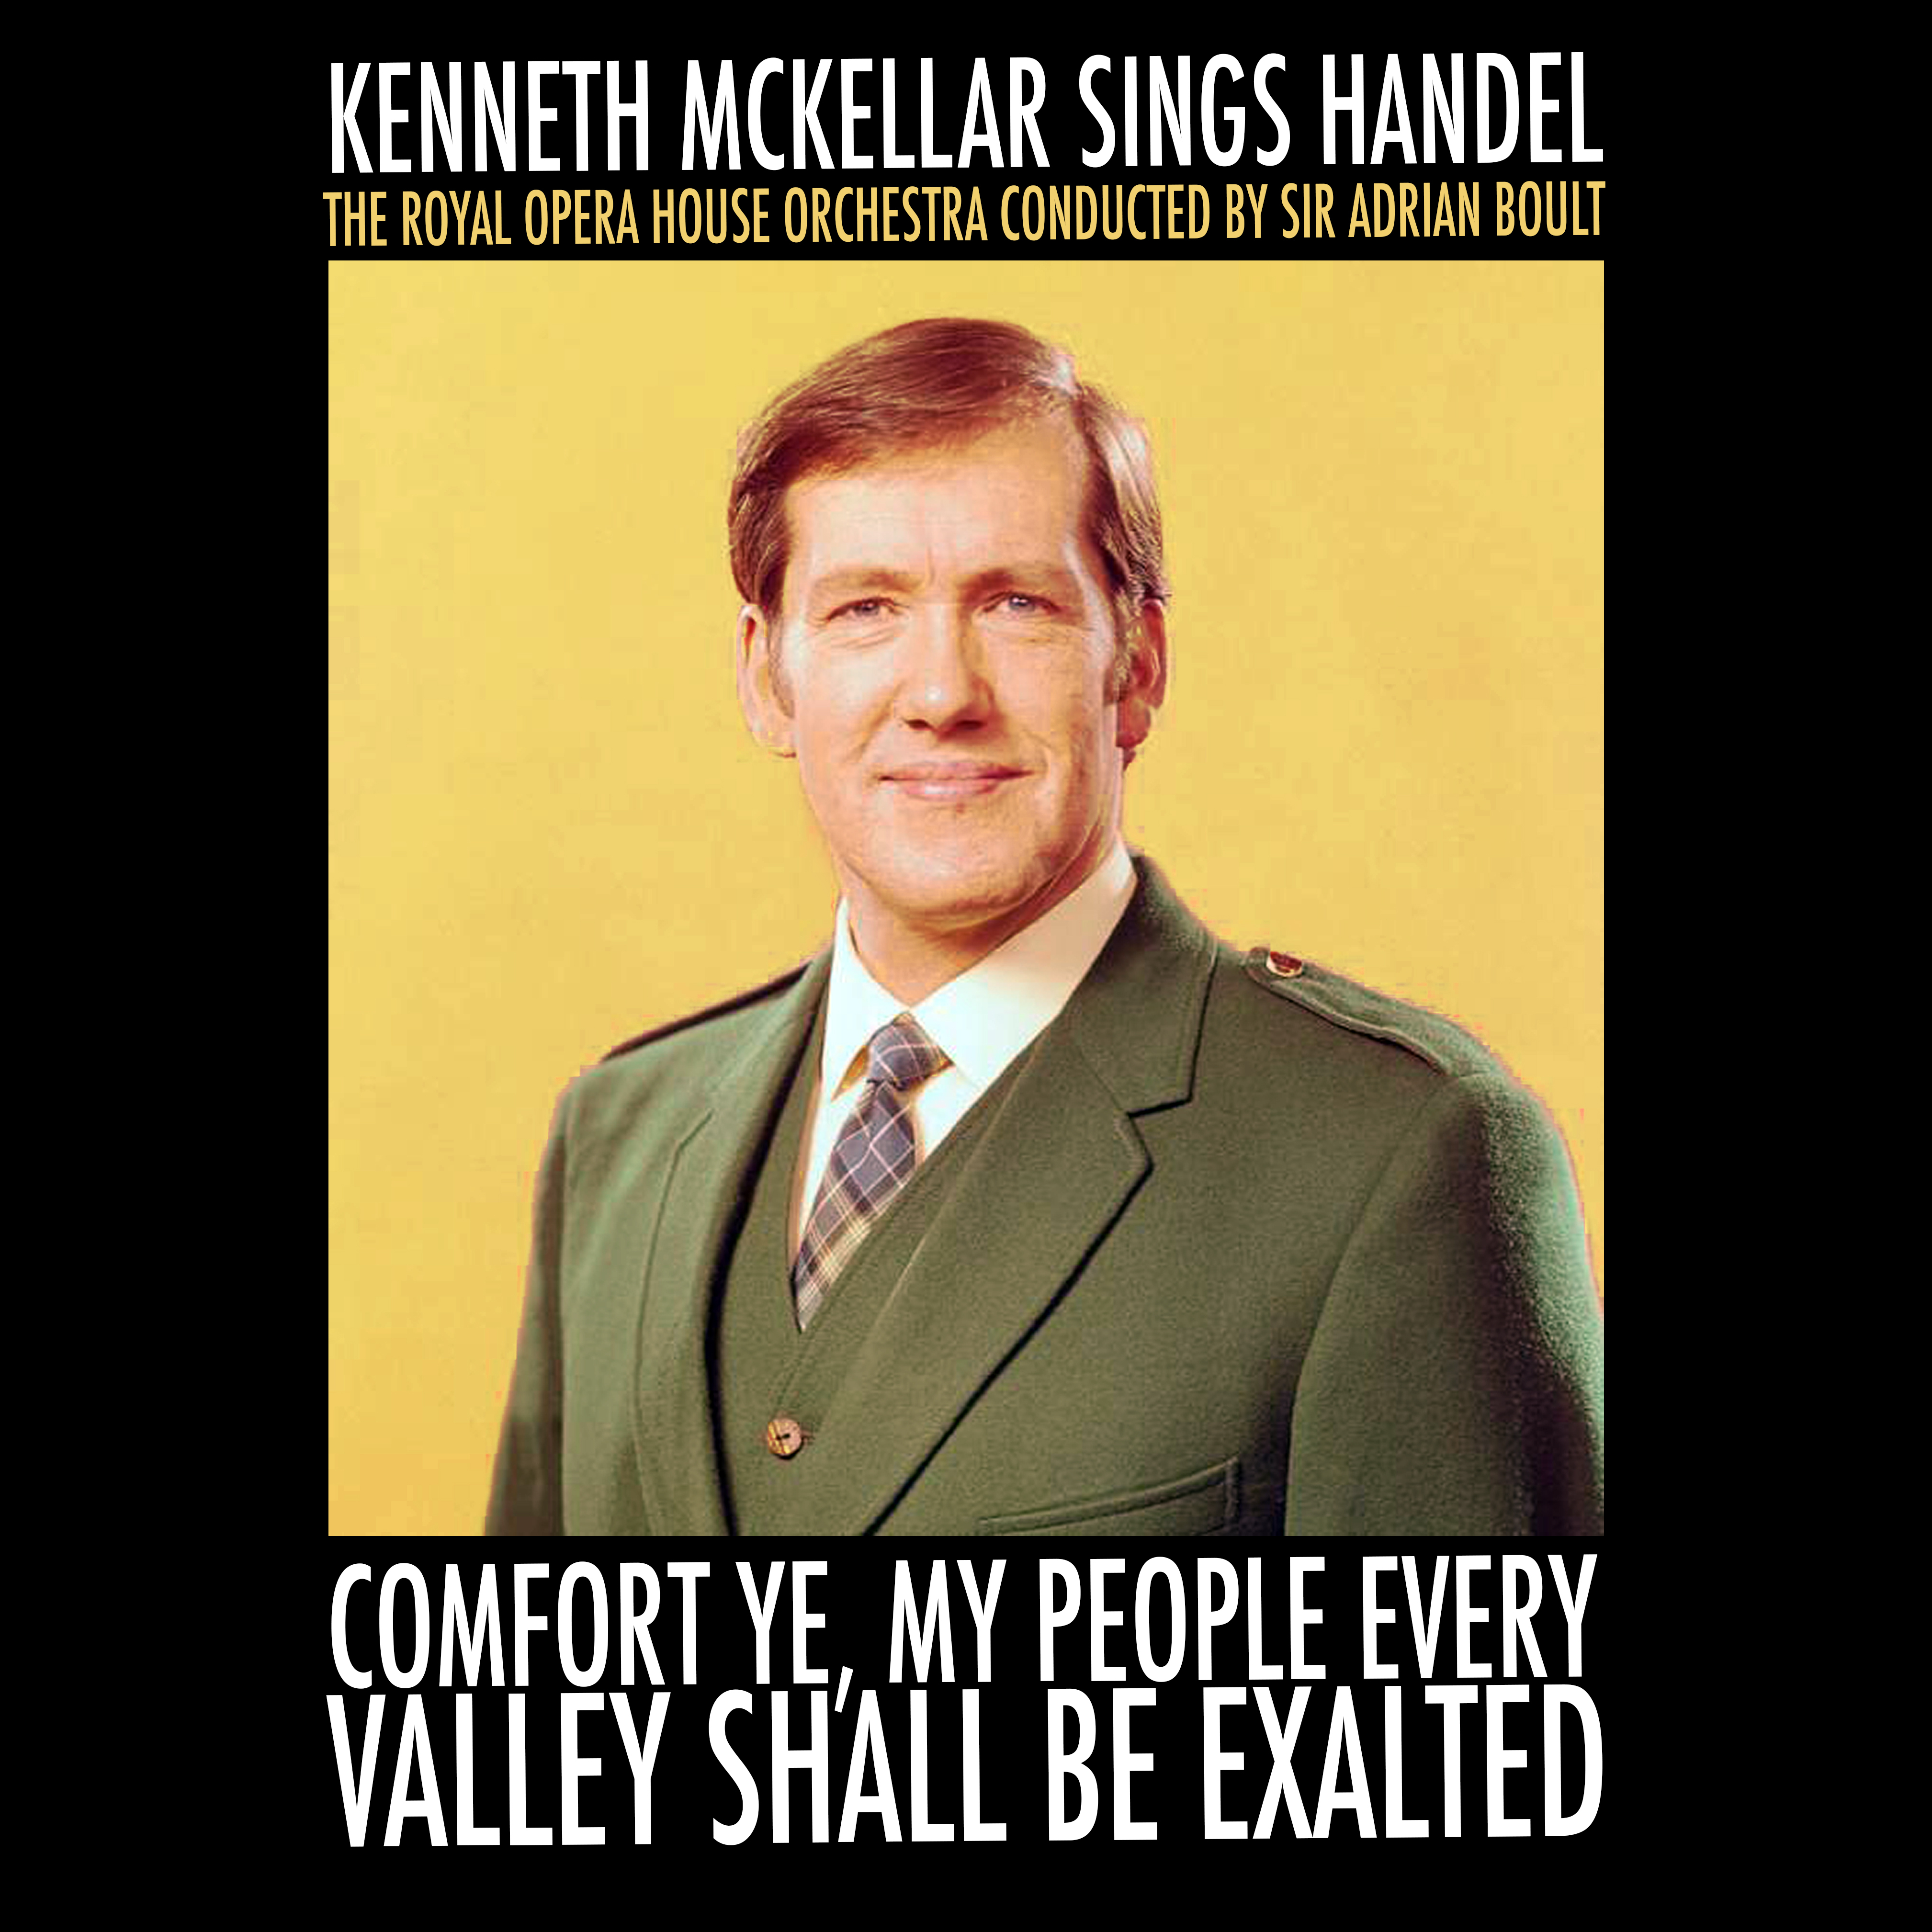 Messiah, HWV. 56, Scene 1: "Comfort Ye, My People Every Valley Shall Be Exalted"